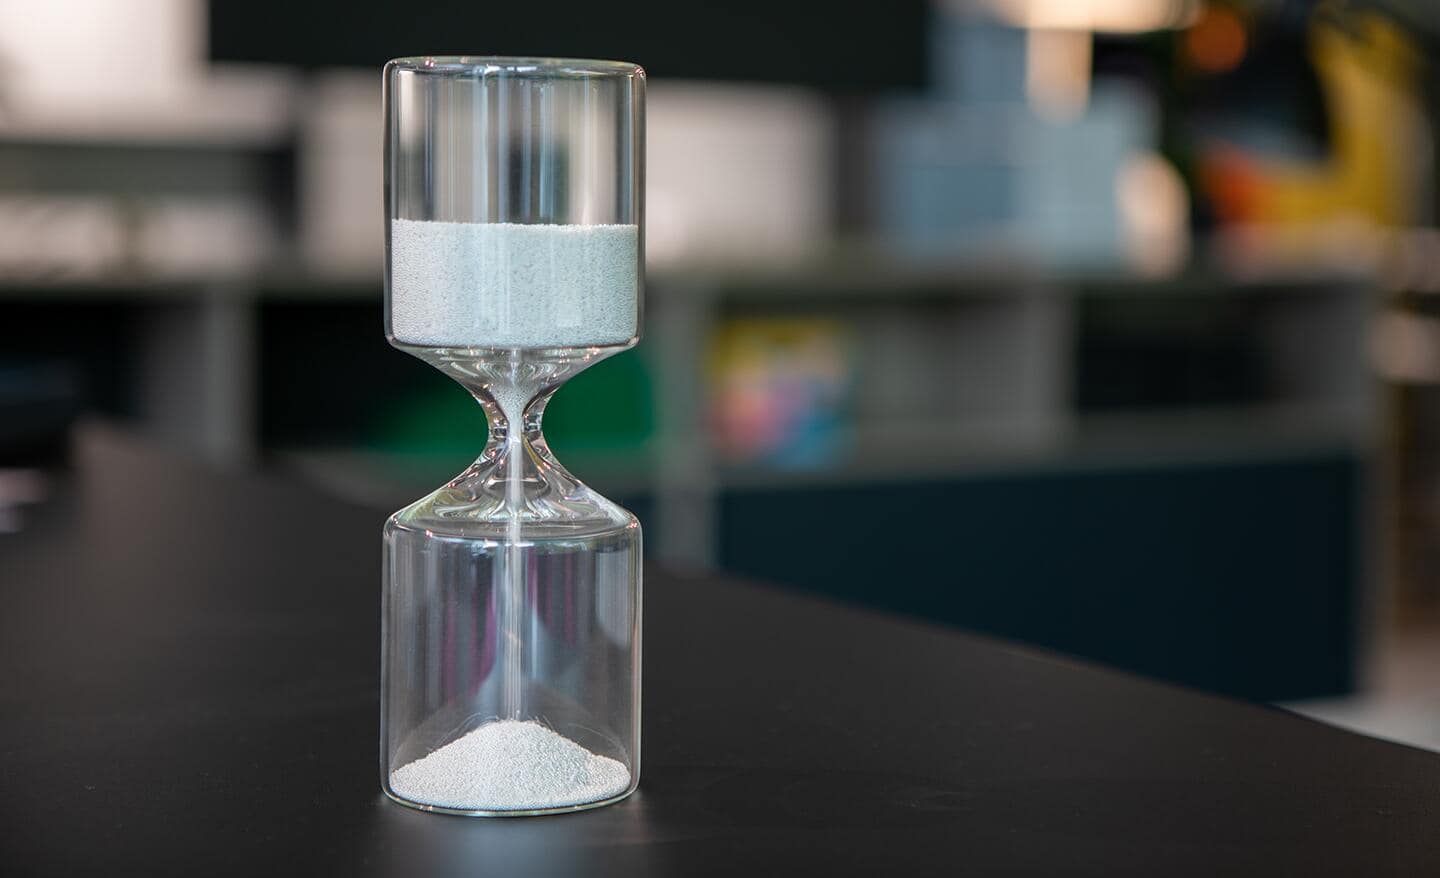 An hourglass on a table depicts the passage of time.